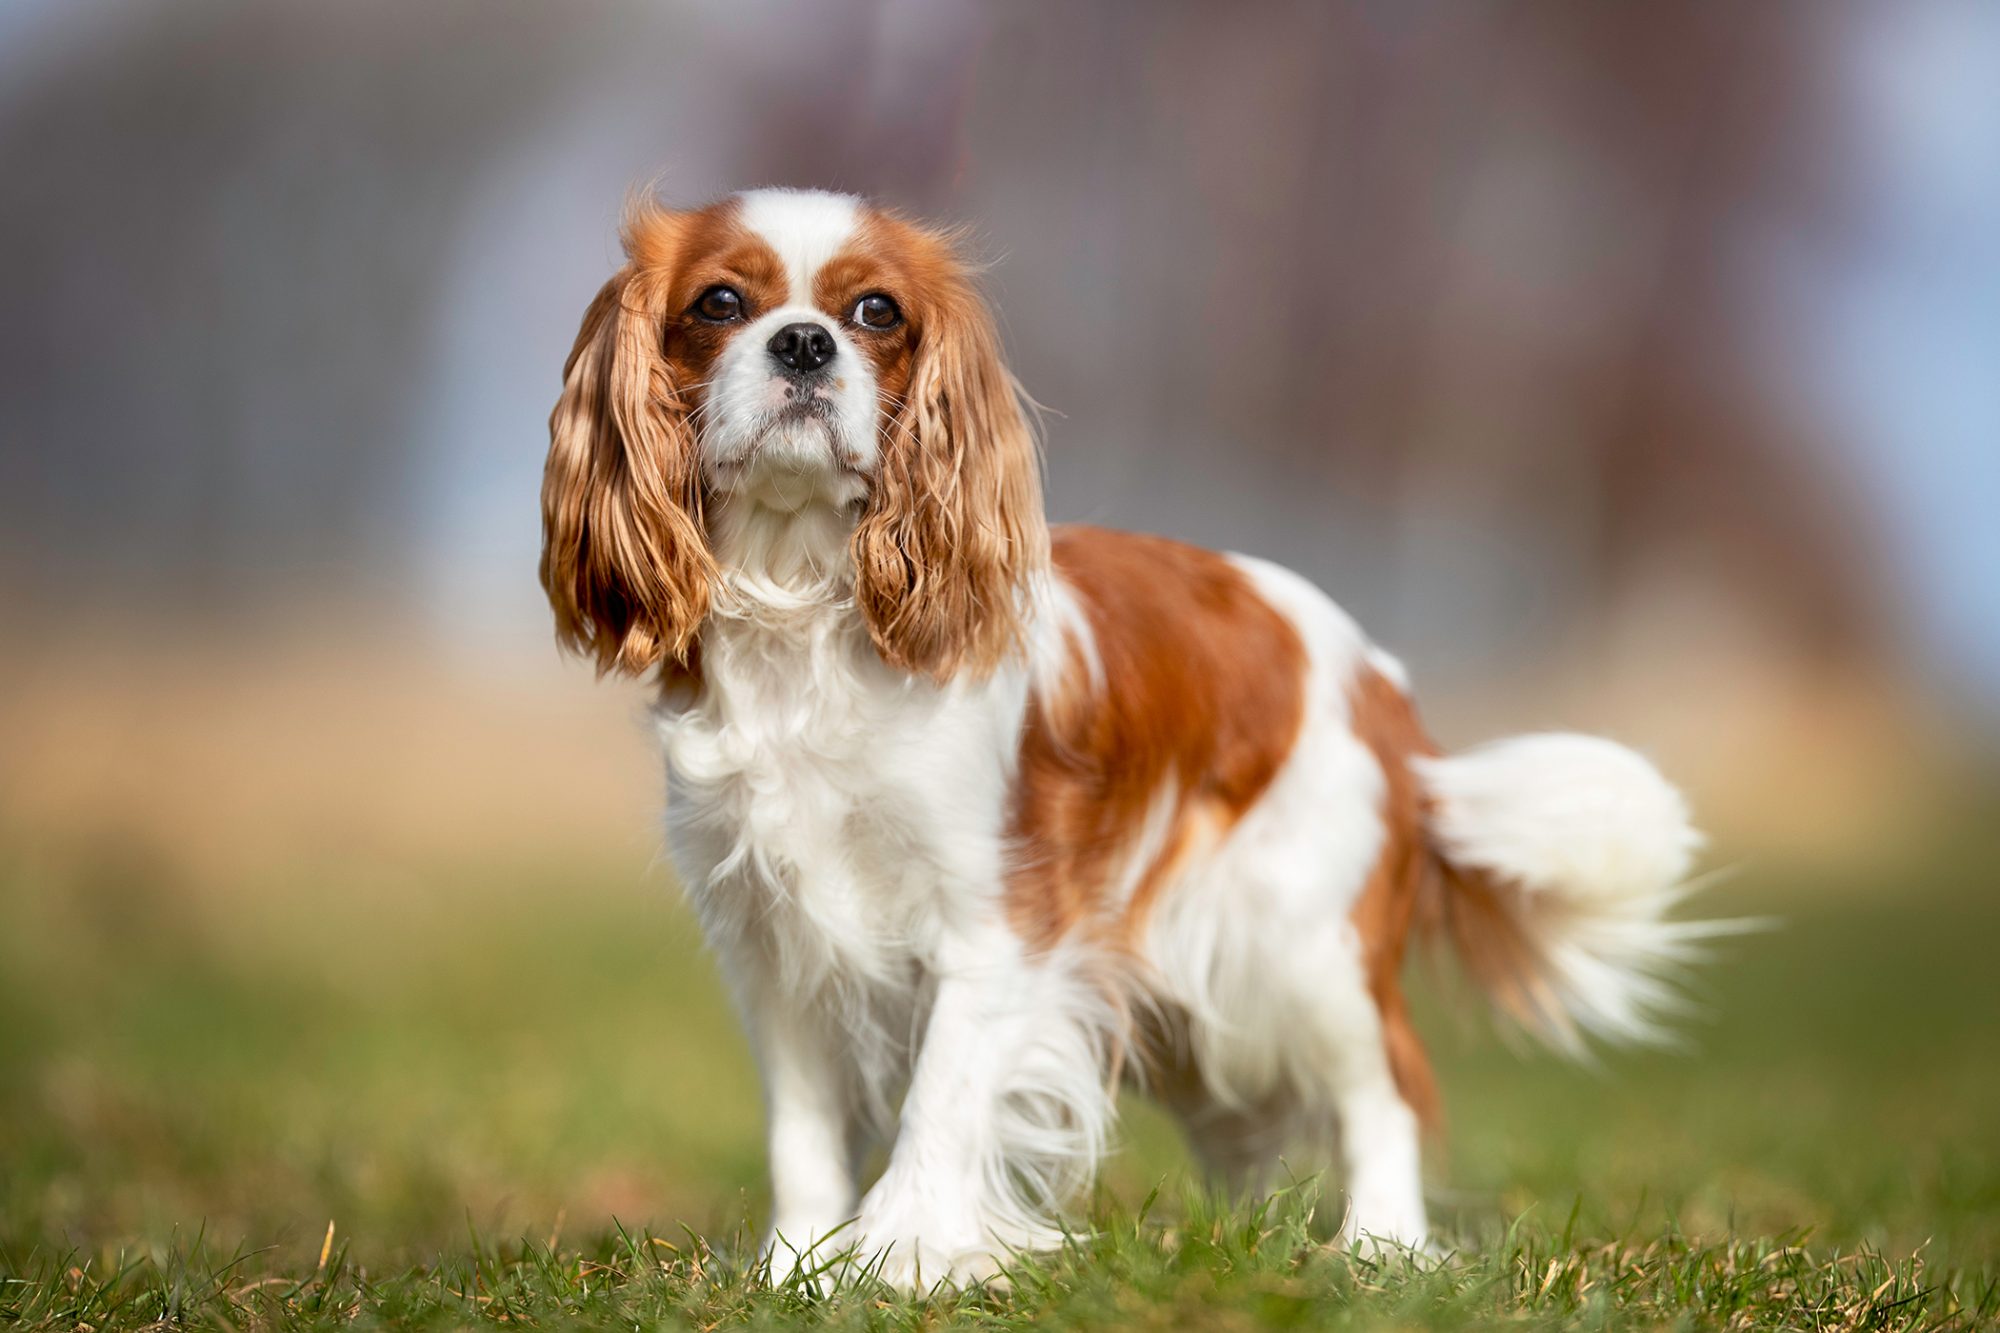 Red and white spaniel stands in grass